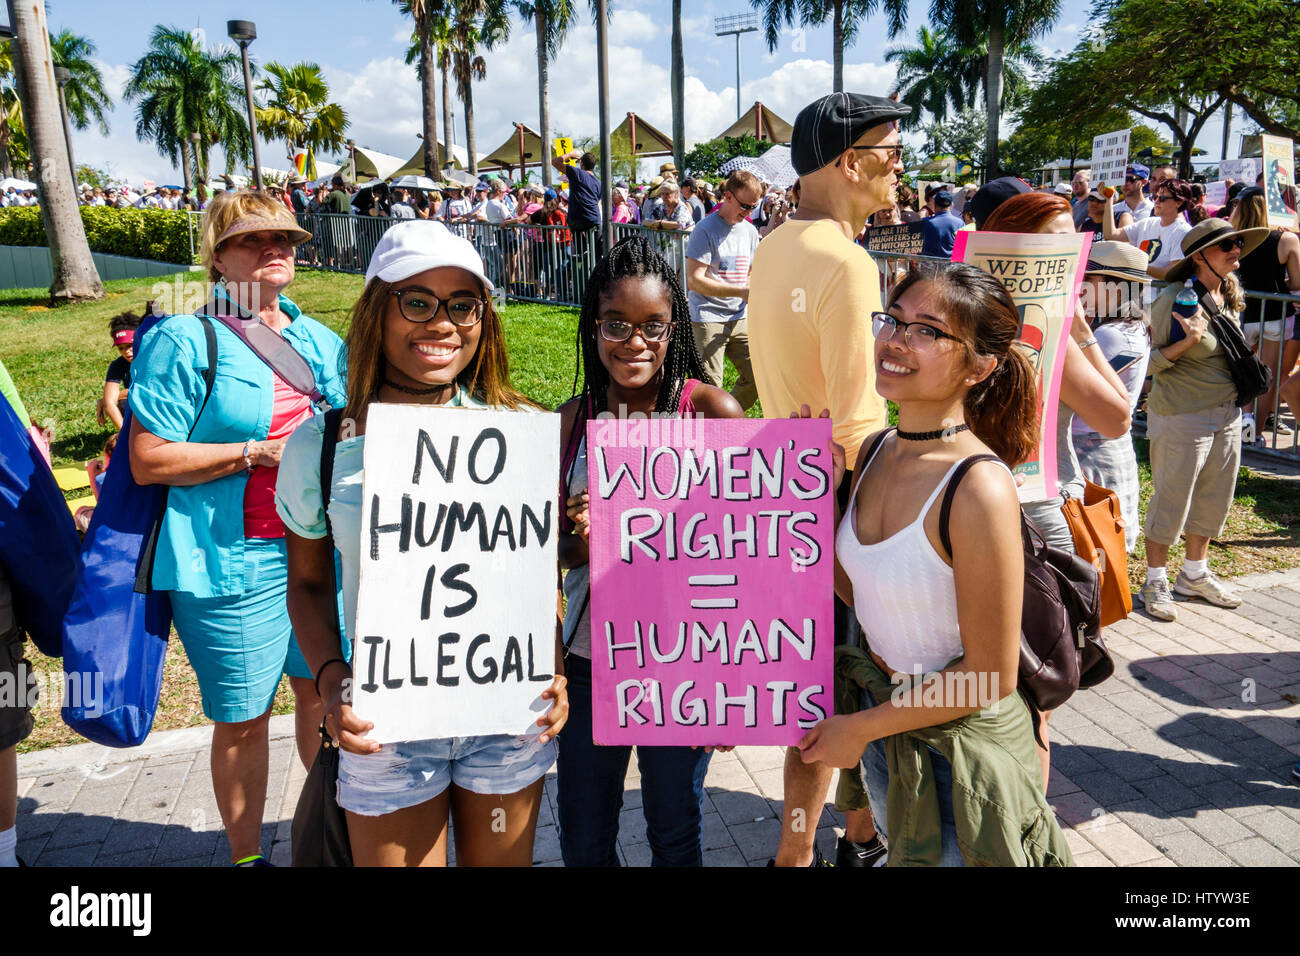 Miami Florida,Downtown,Bayfront Park,Women's March,political protest,march,Human rights,advocacy,sign,Black Asian,students pupil girl girls,f Foto Stock